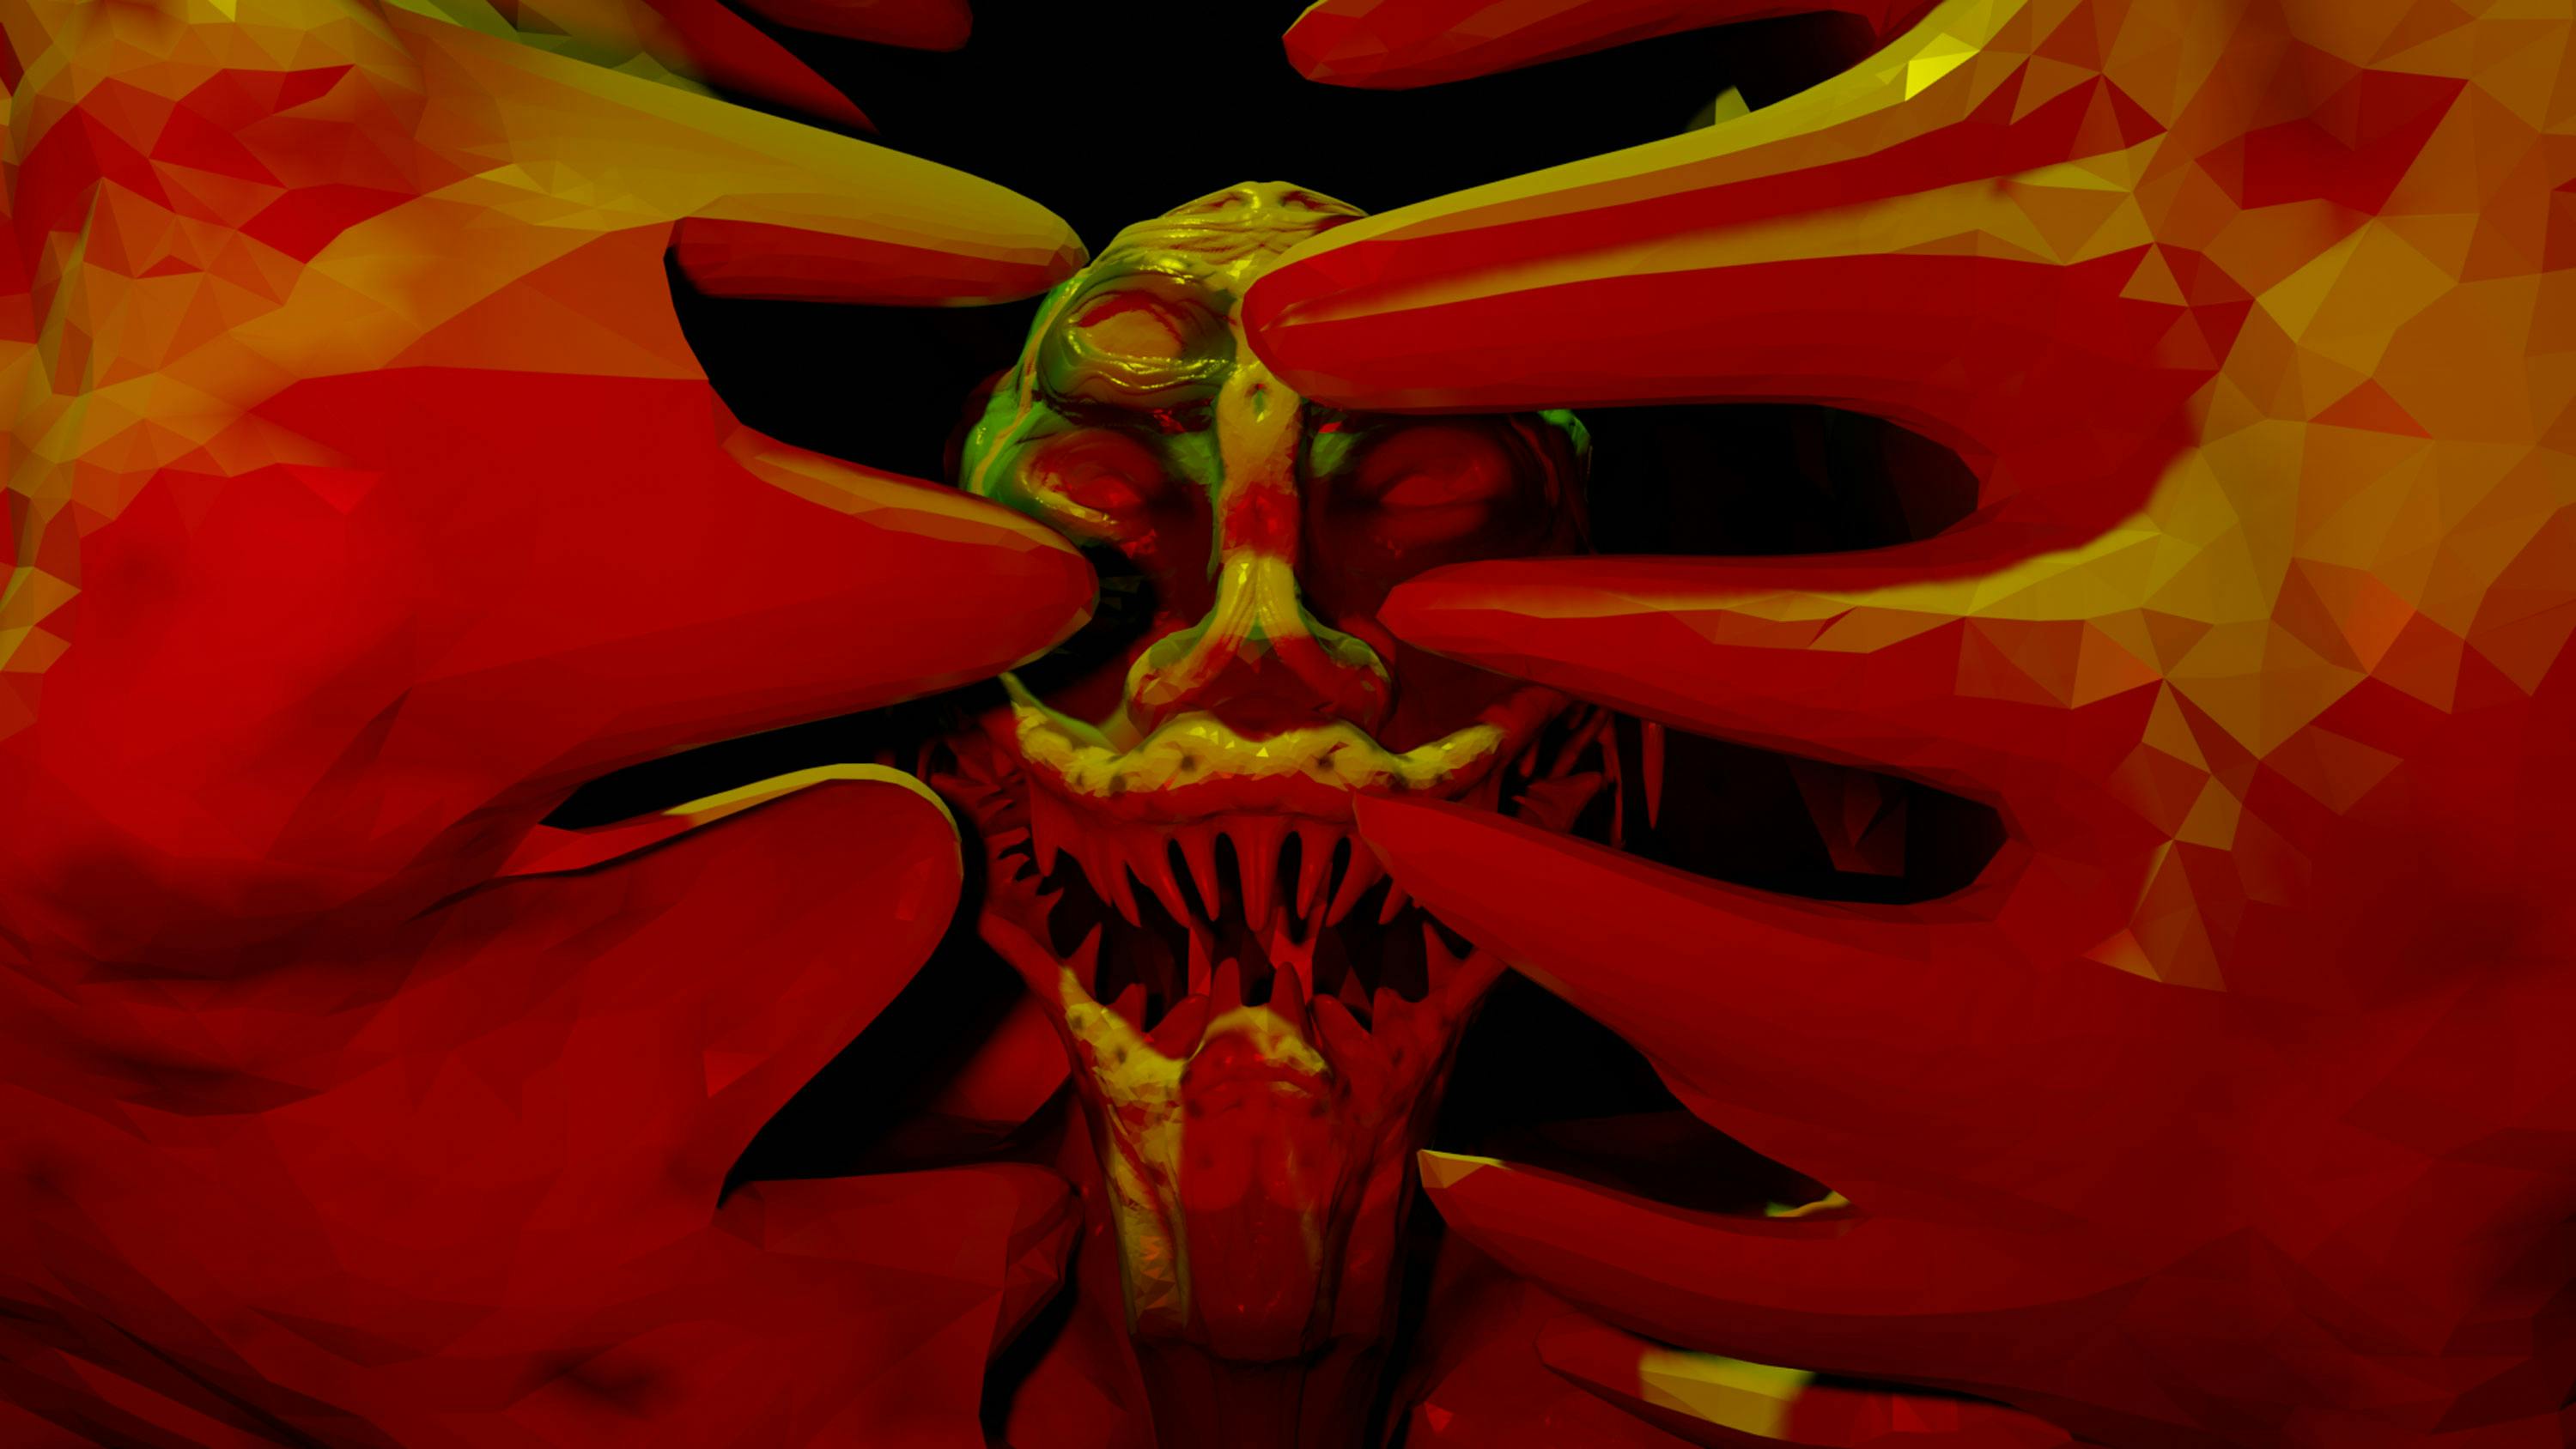 A computer-generated image of a monster peering between a jagged surface.